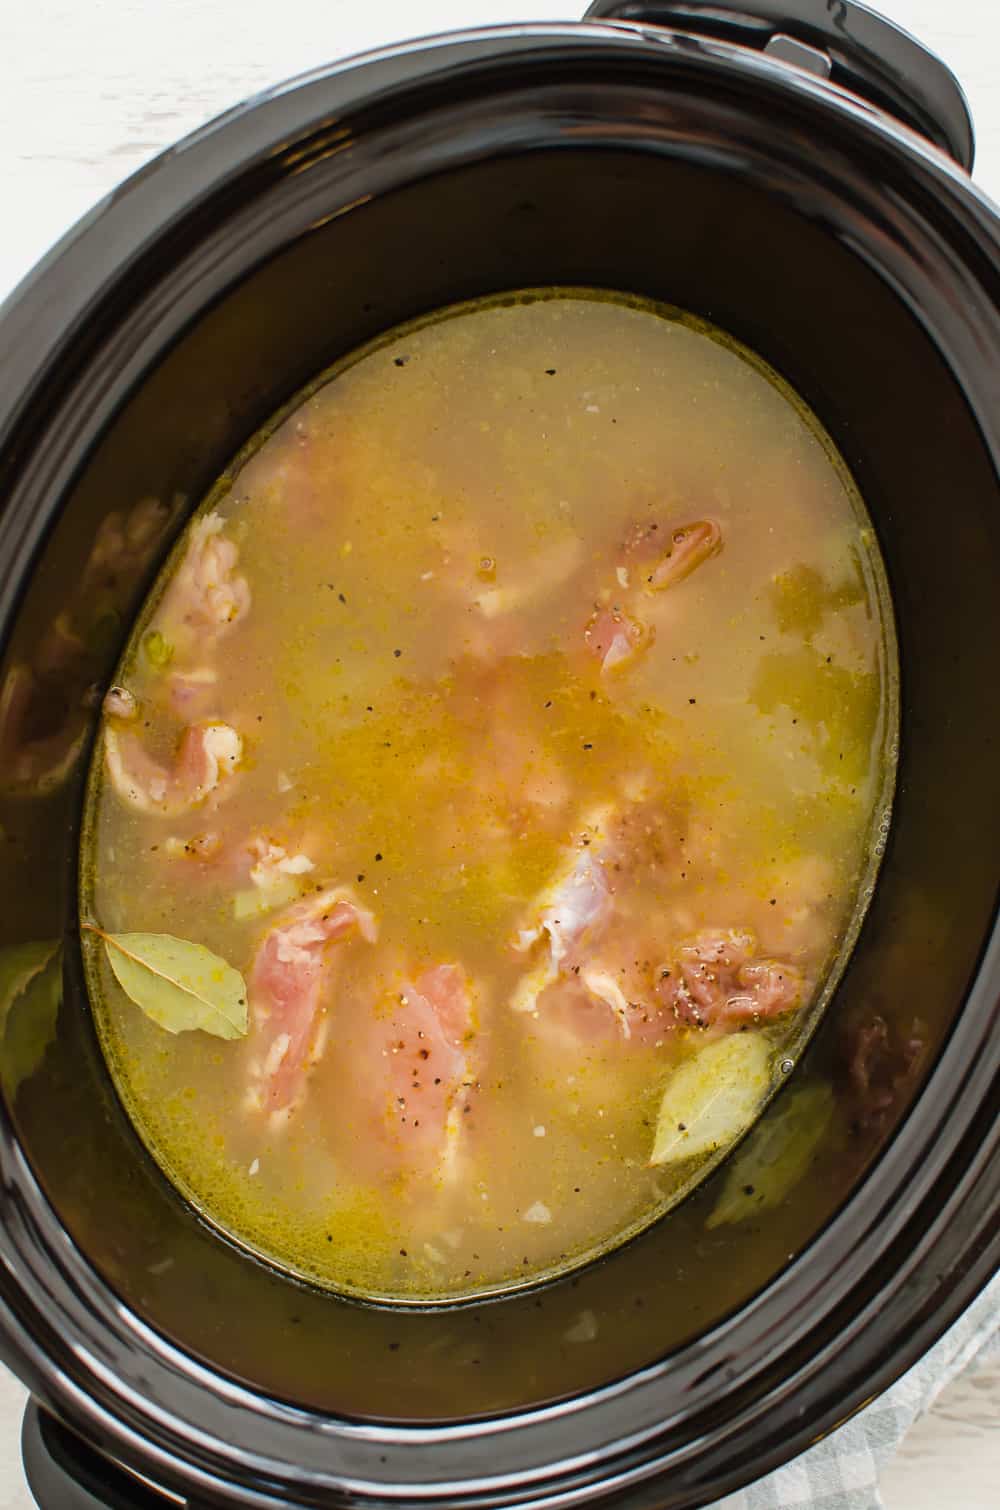 Broth, chicken, and seasonings in slow cooker for chicken and dumplings.